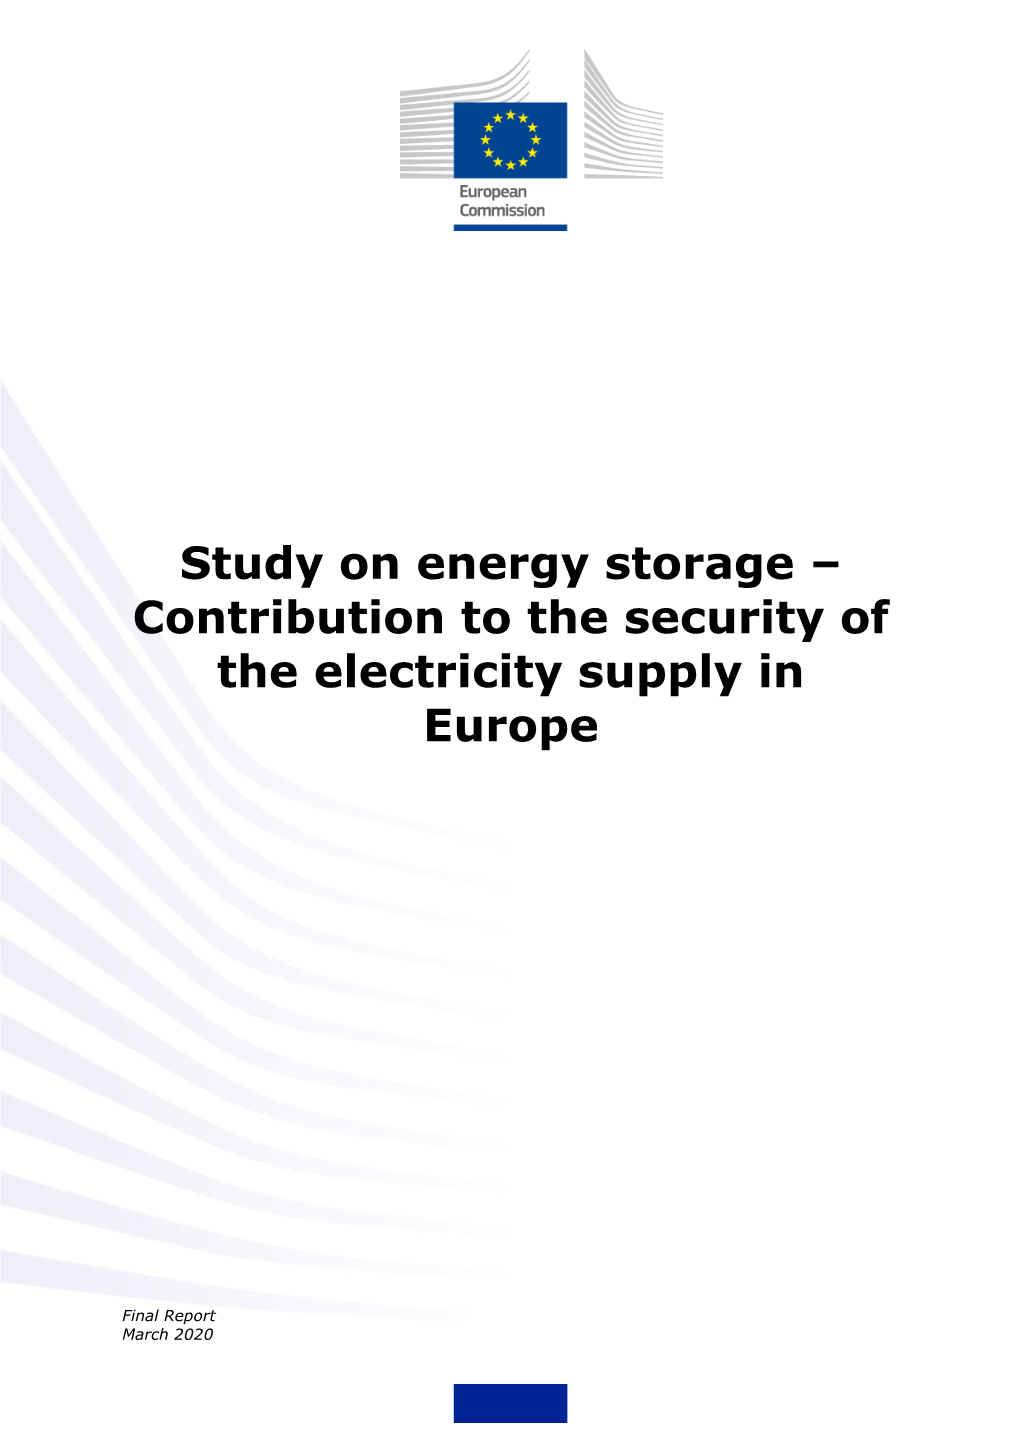 Study on Energy Storage – Contribution to the Security of the Electricity Supply in Europe